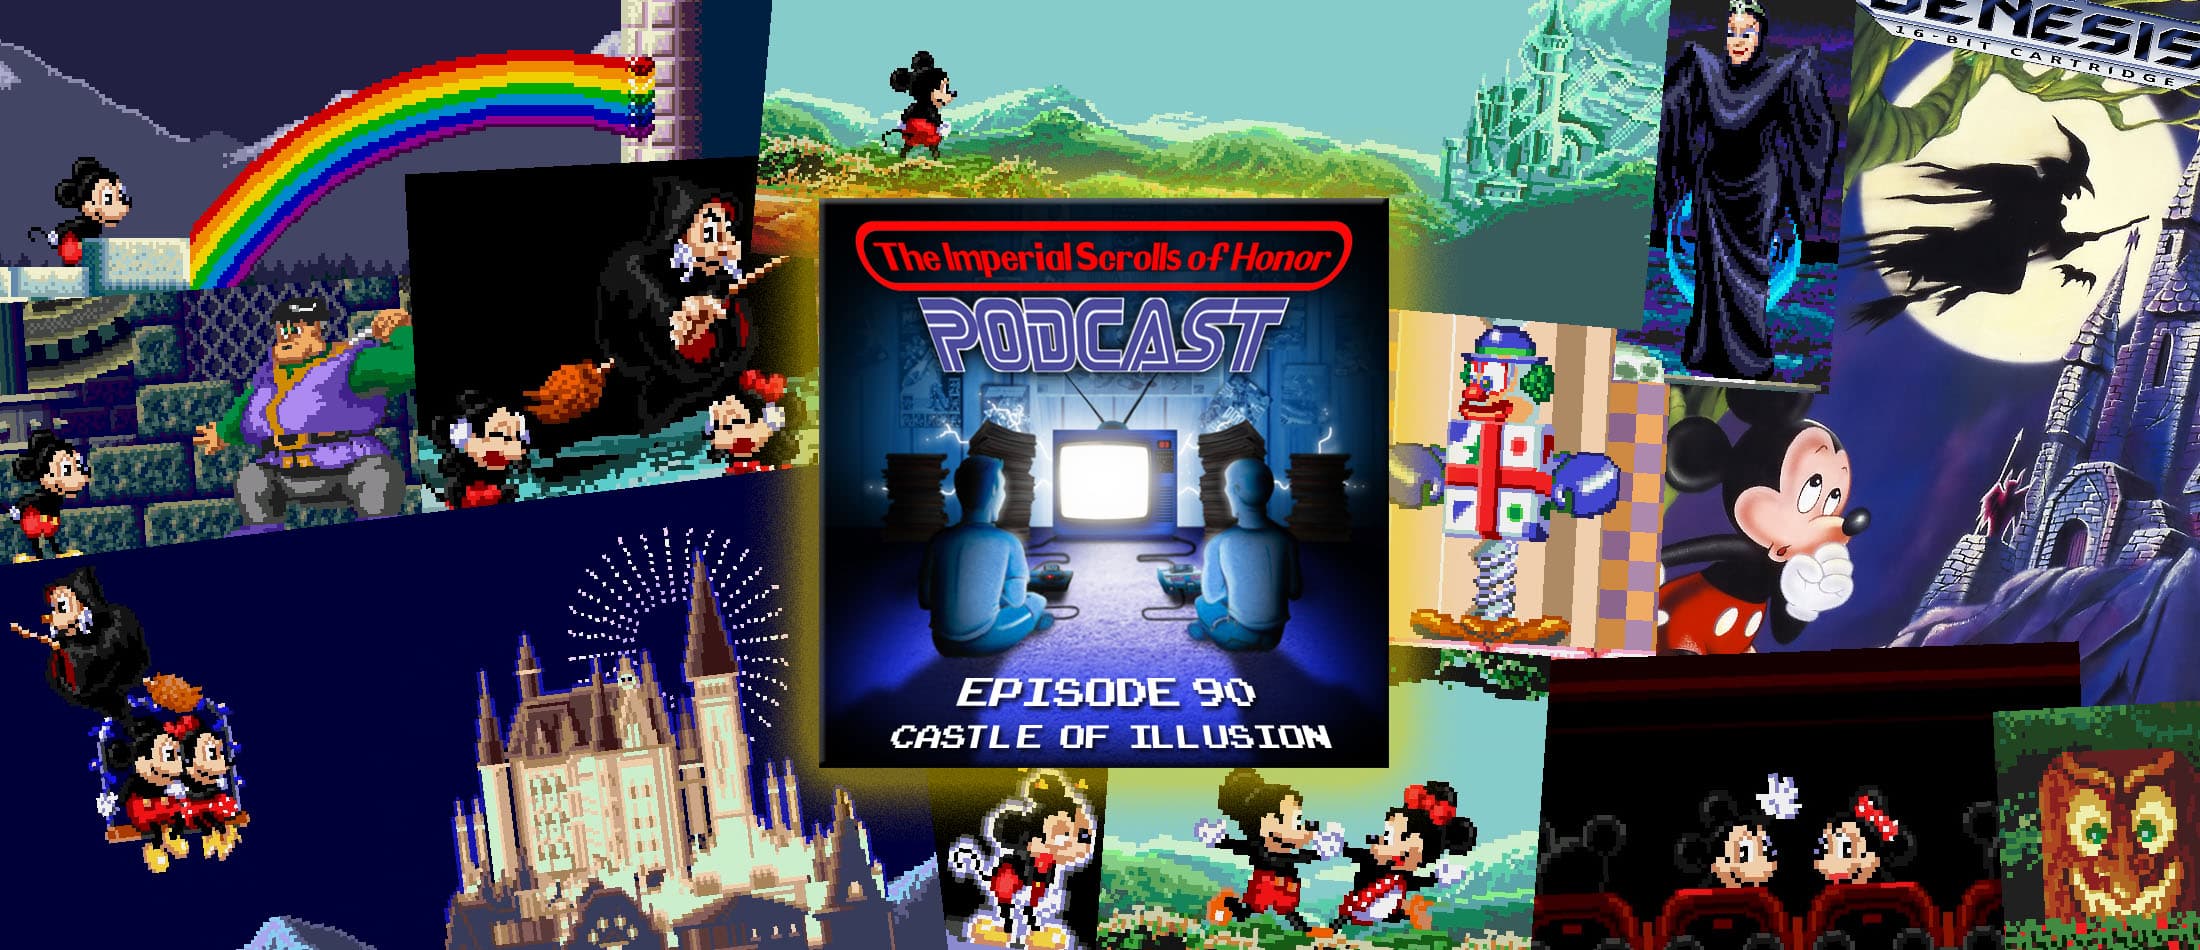 The Imperial Scrolls of Honor Podcast - Ep 90 - Castle of Illusion (GEN)